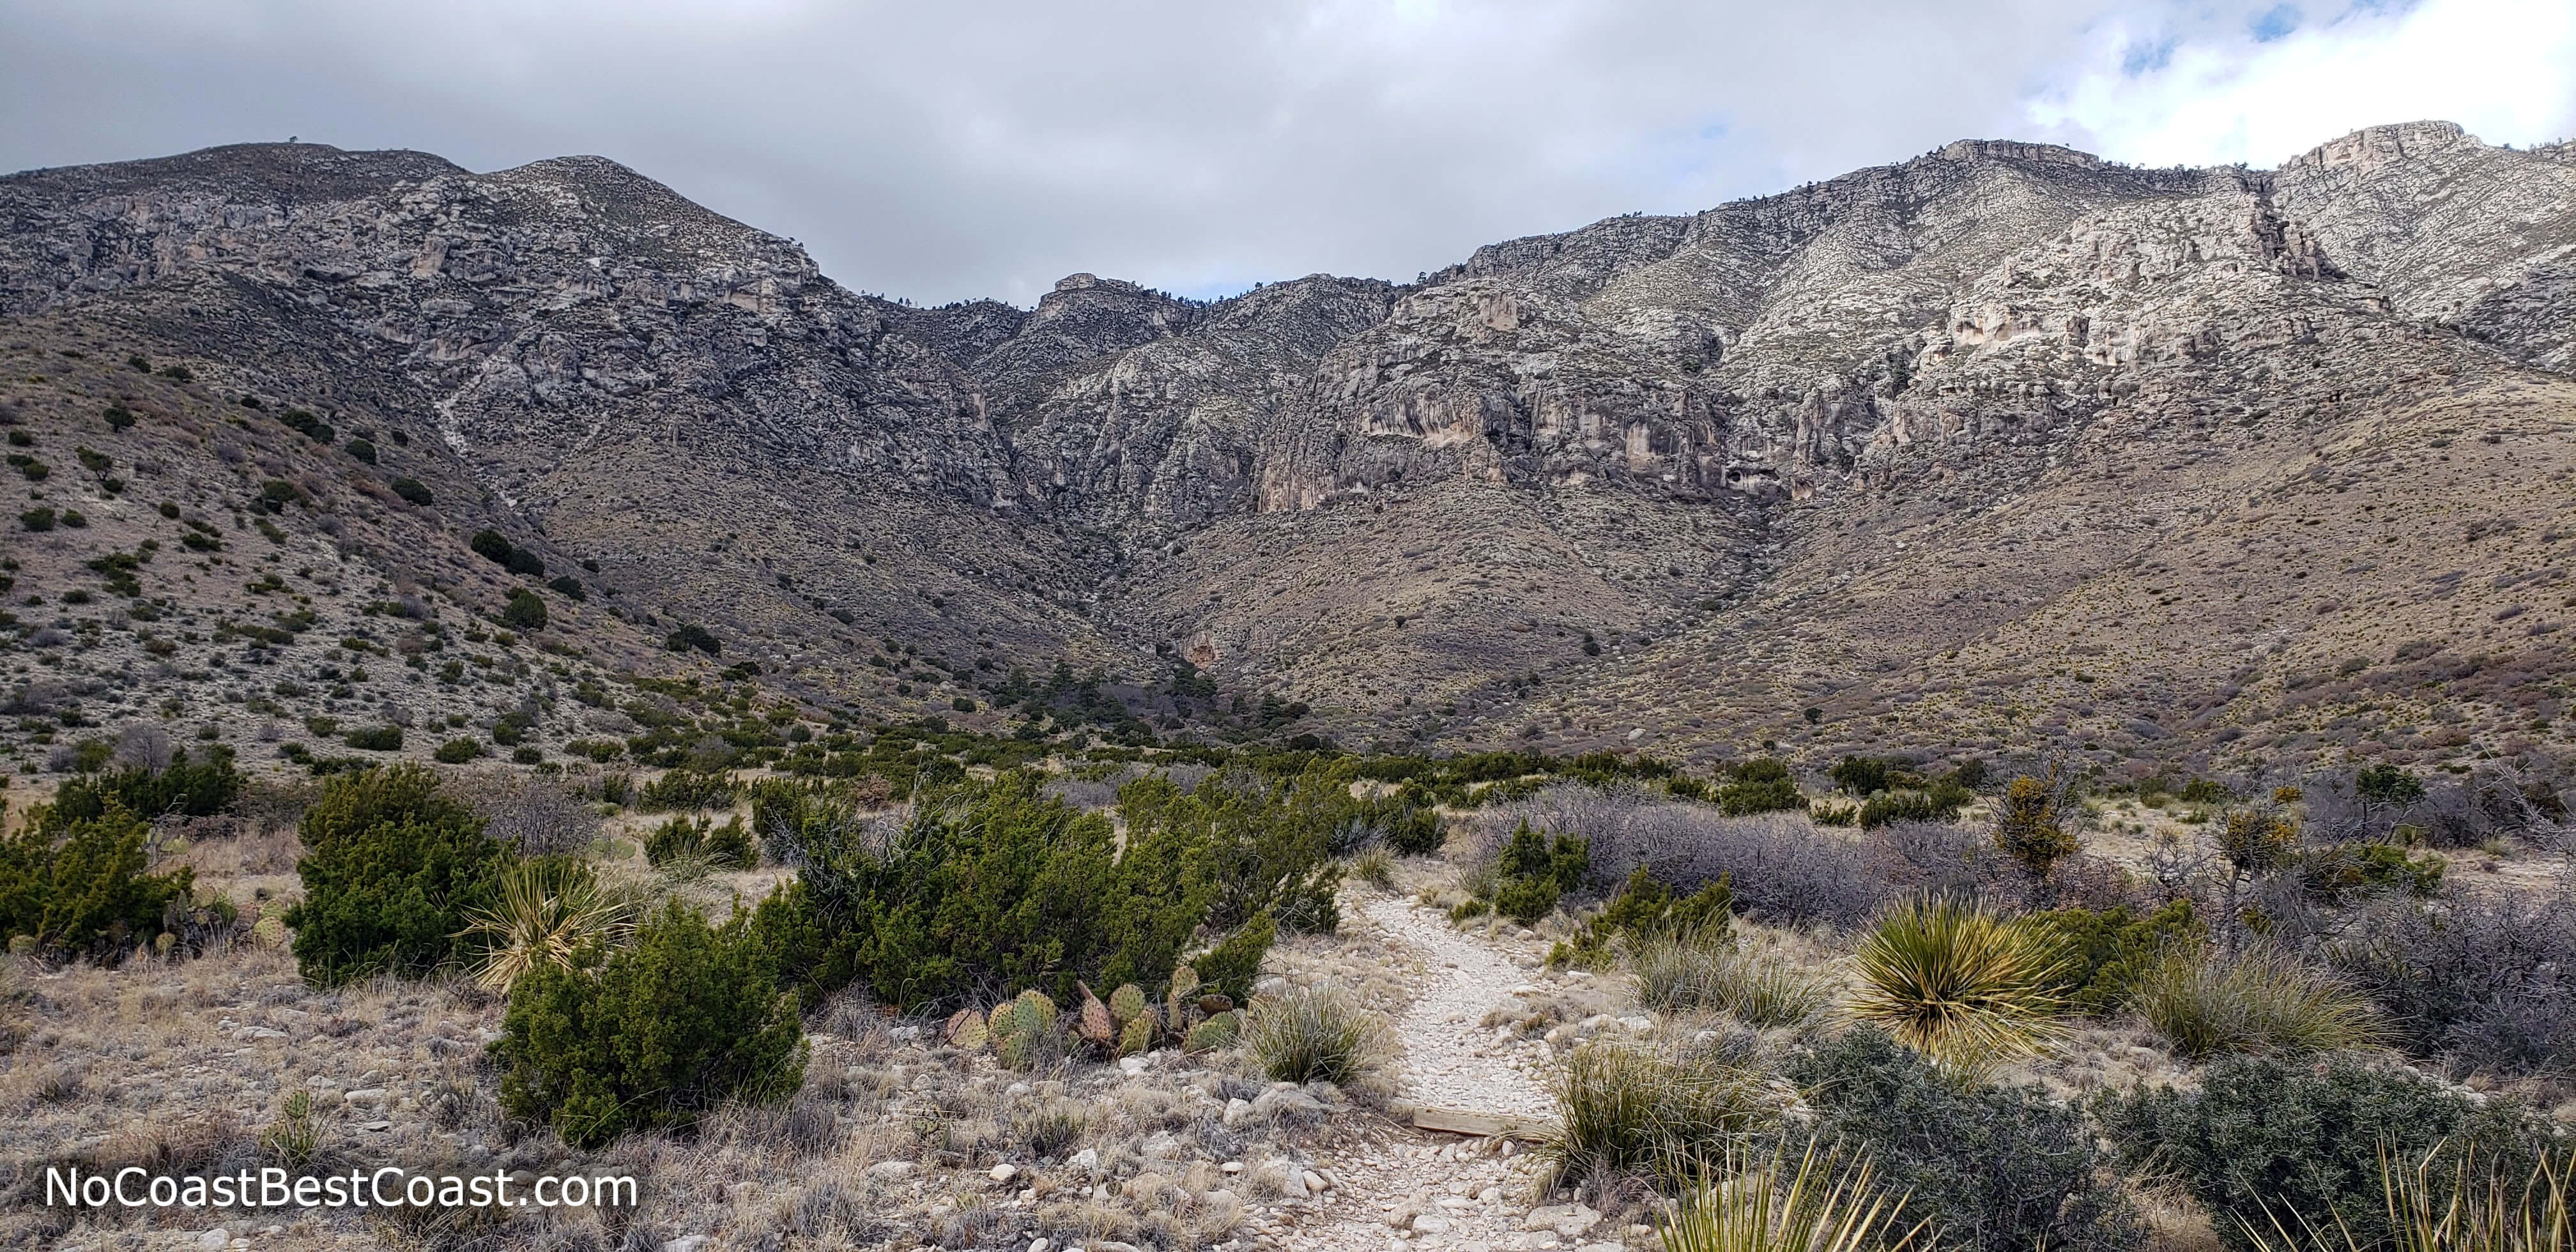 The trail as it heads towards the base of the Guadalupe Mountains